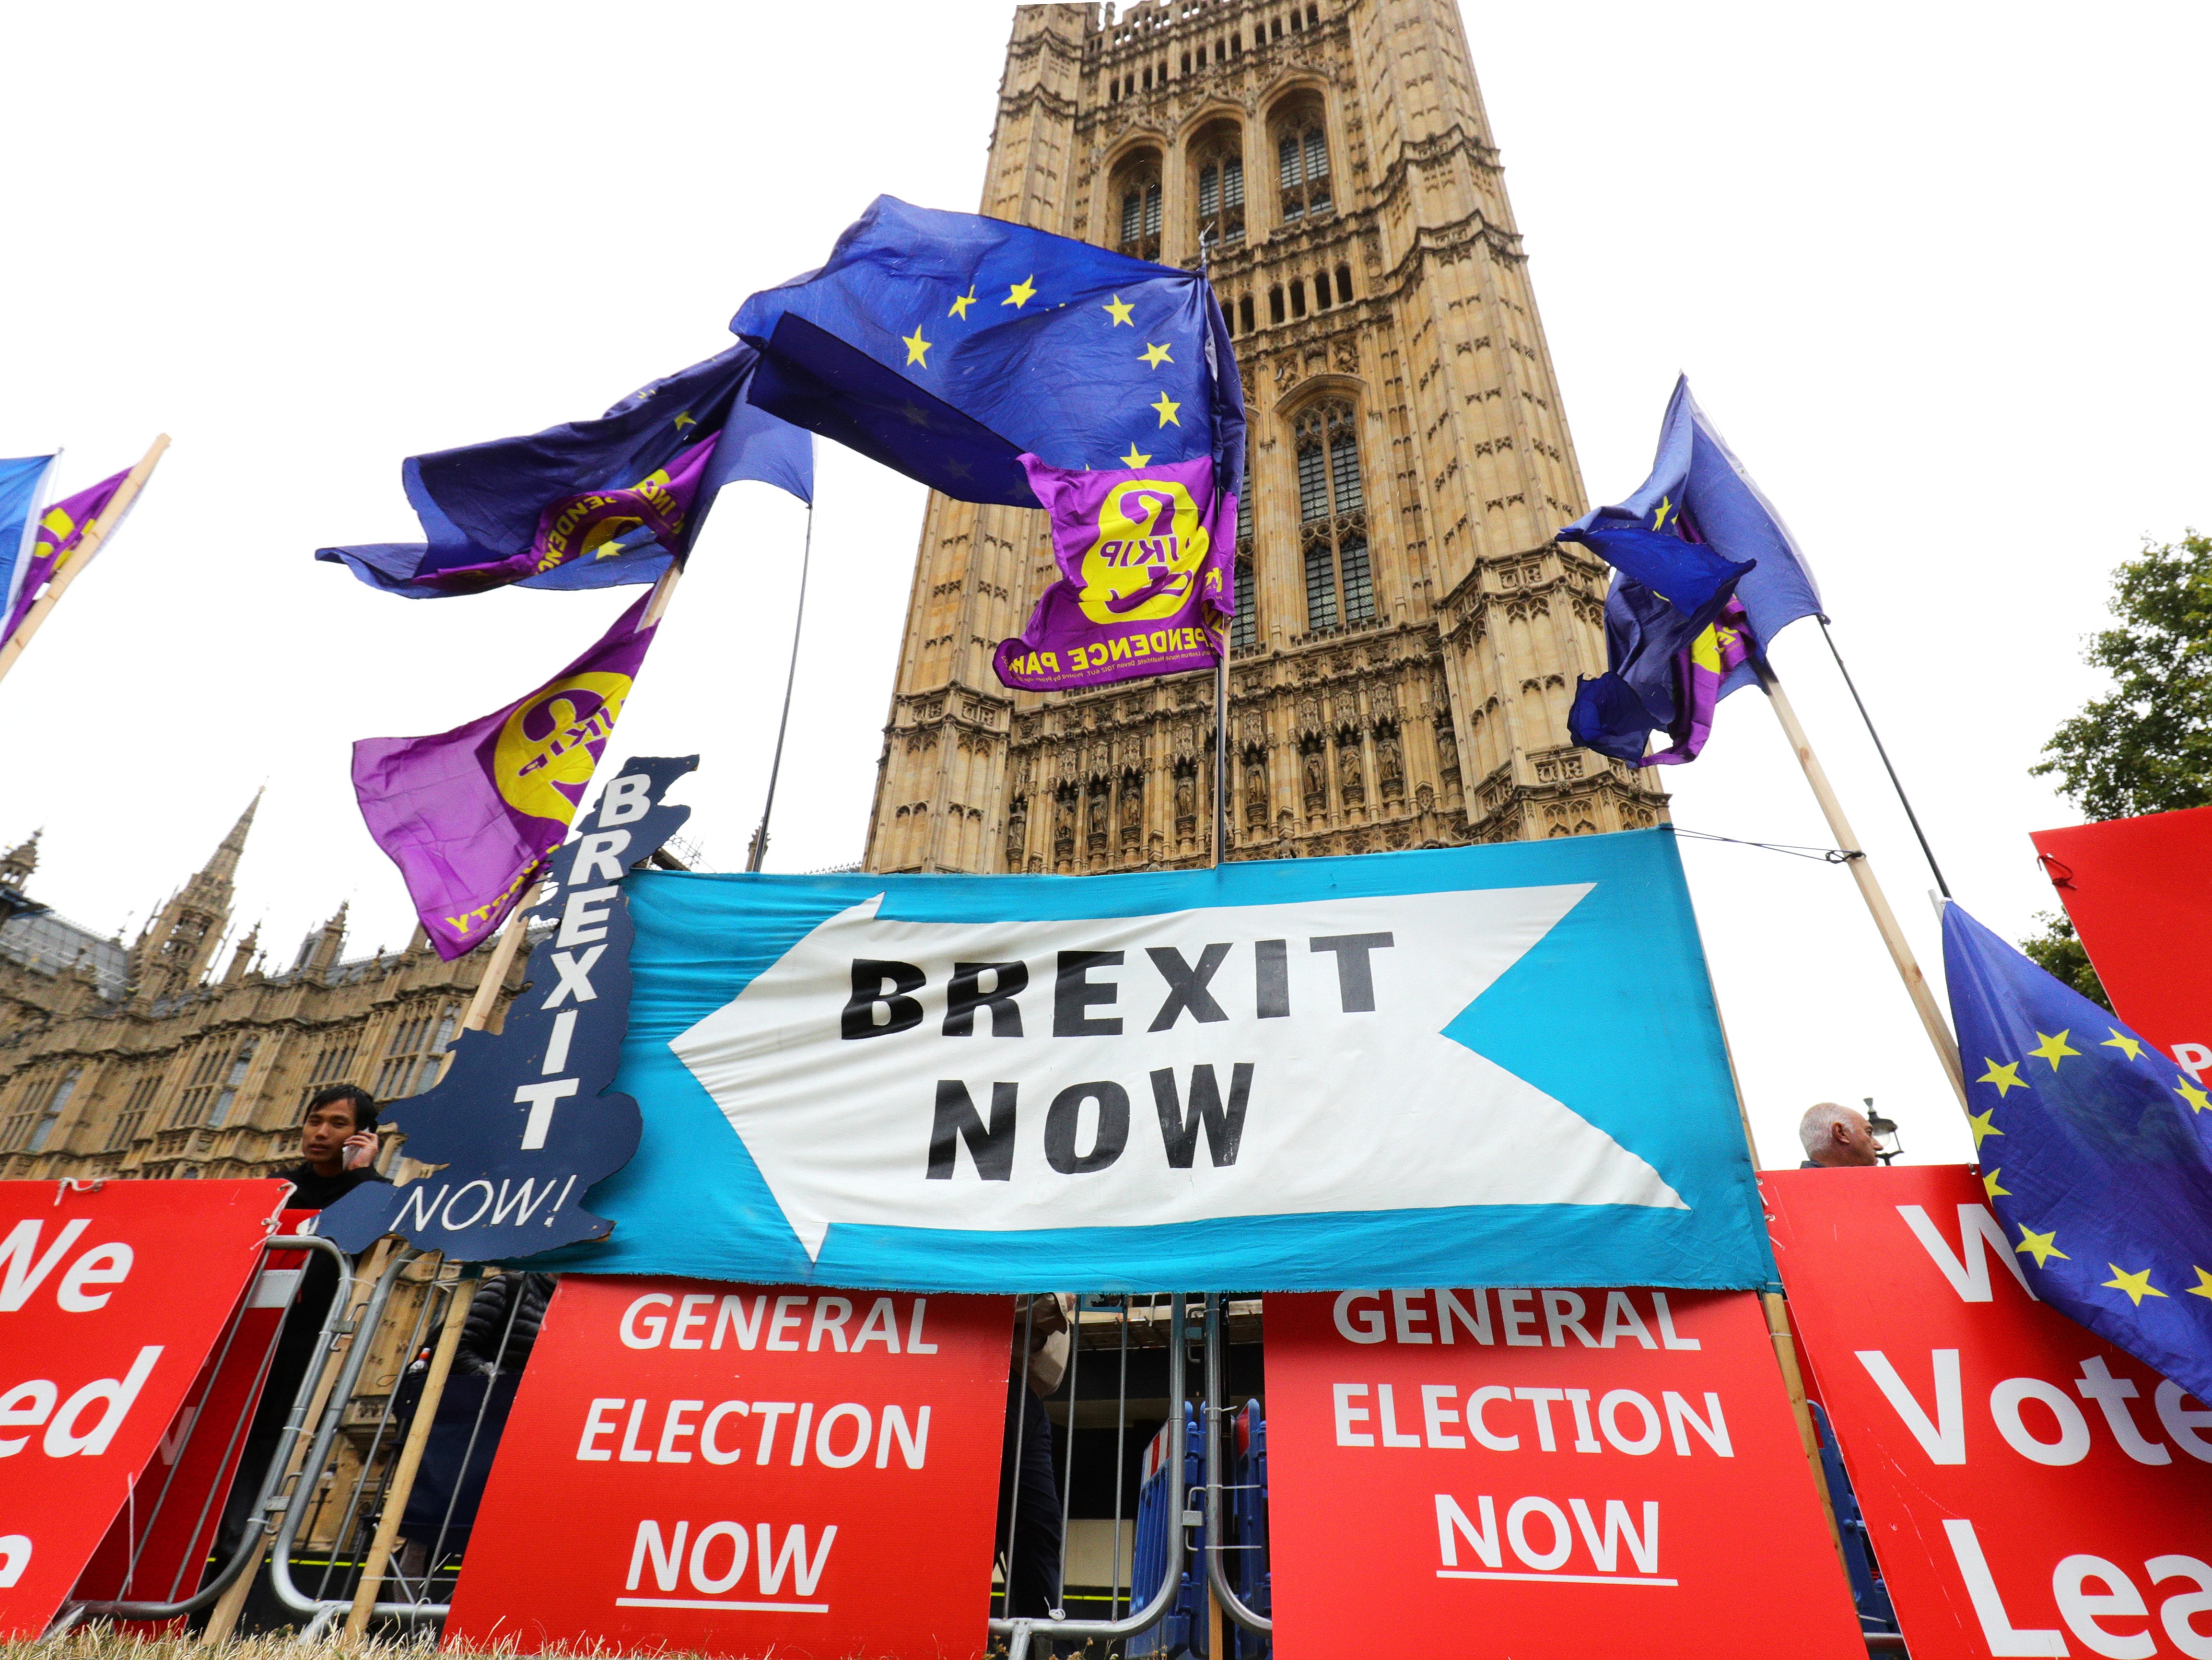 2019 saw several Brexit-related protests outside parliament